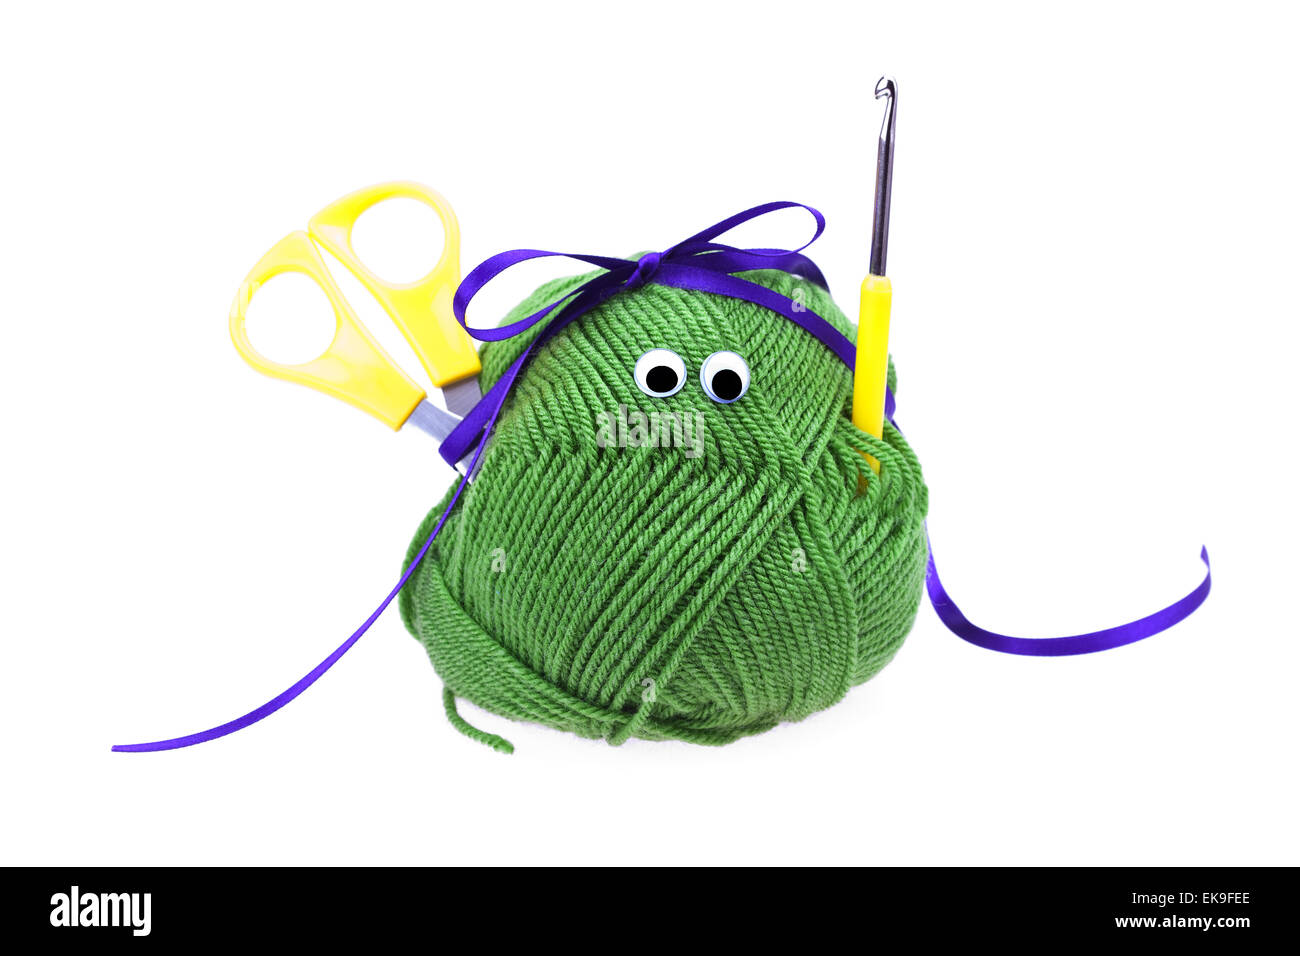 skein of wool with eyes, ribbon, scissors and crochet hooks isol Stock Photo